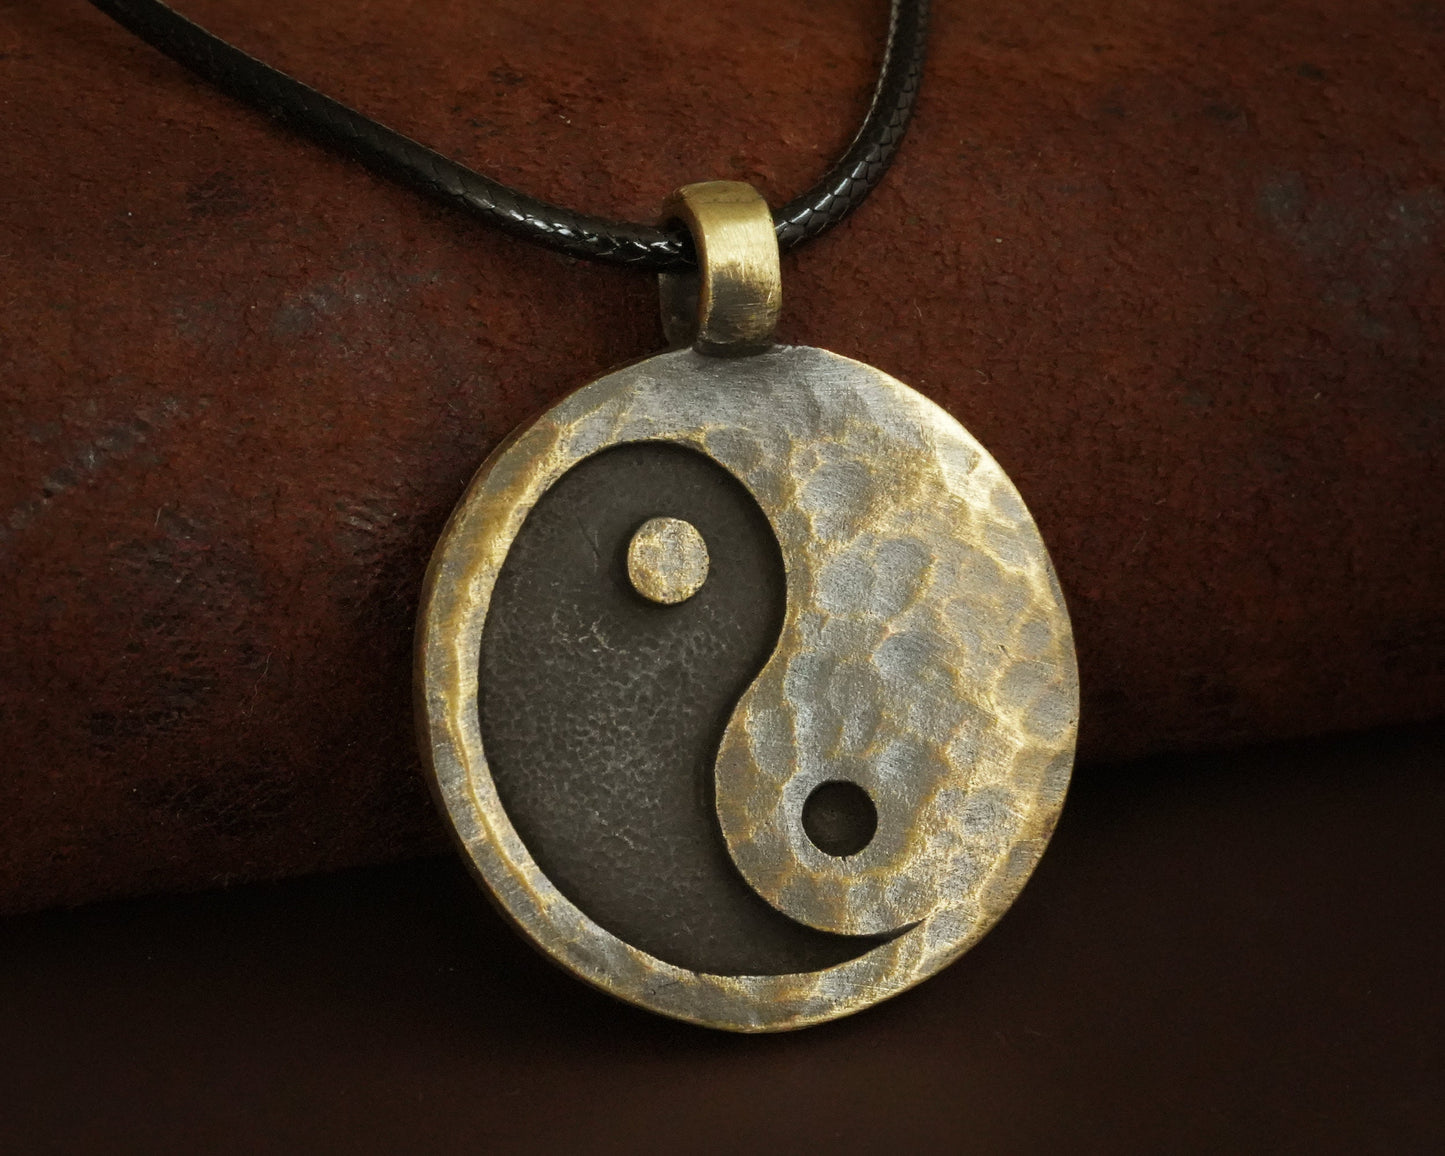 Hand Hammered Ancient Looking Yin Yang Necklace Pendant For Men and Women With Adjustable String - Baldur Jewelry